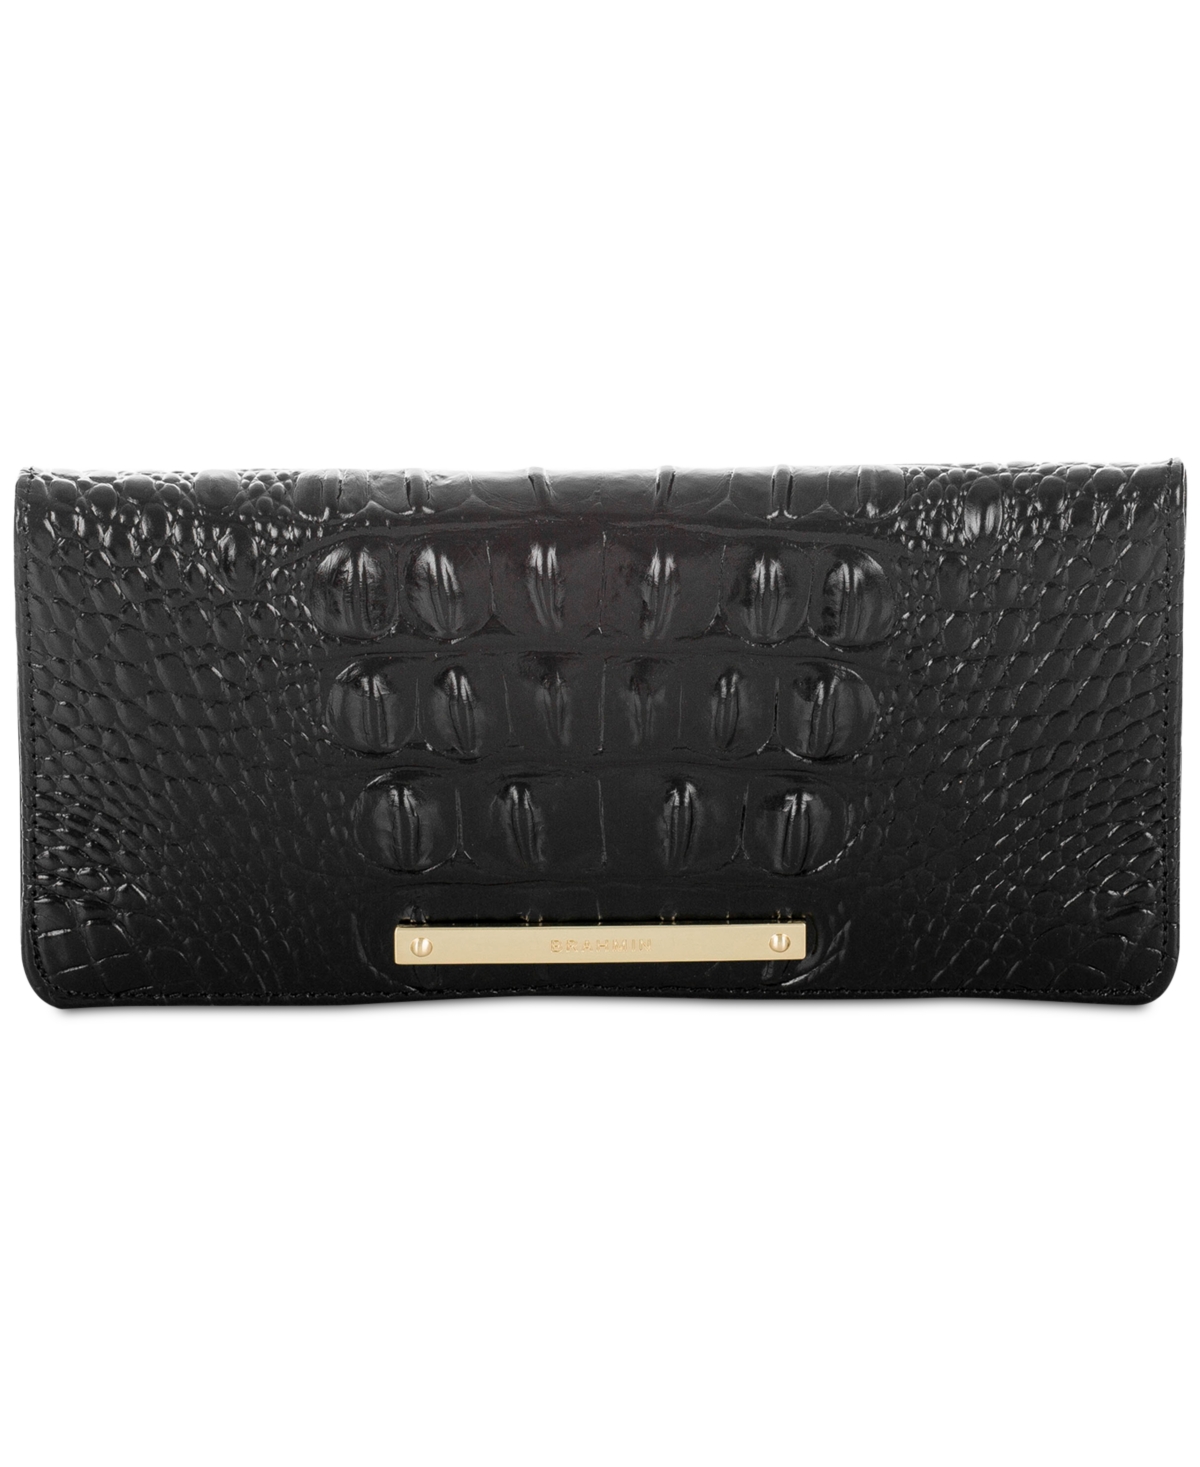 Ady Leather Wallet - Black/Gold